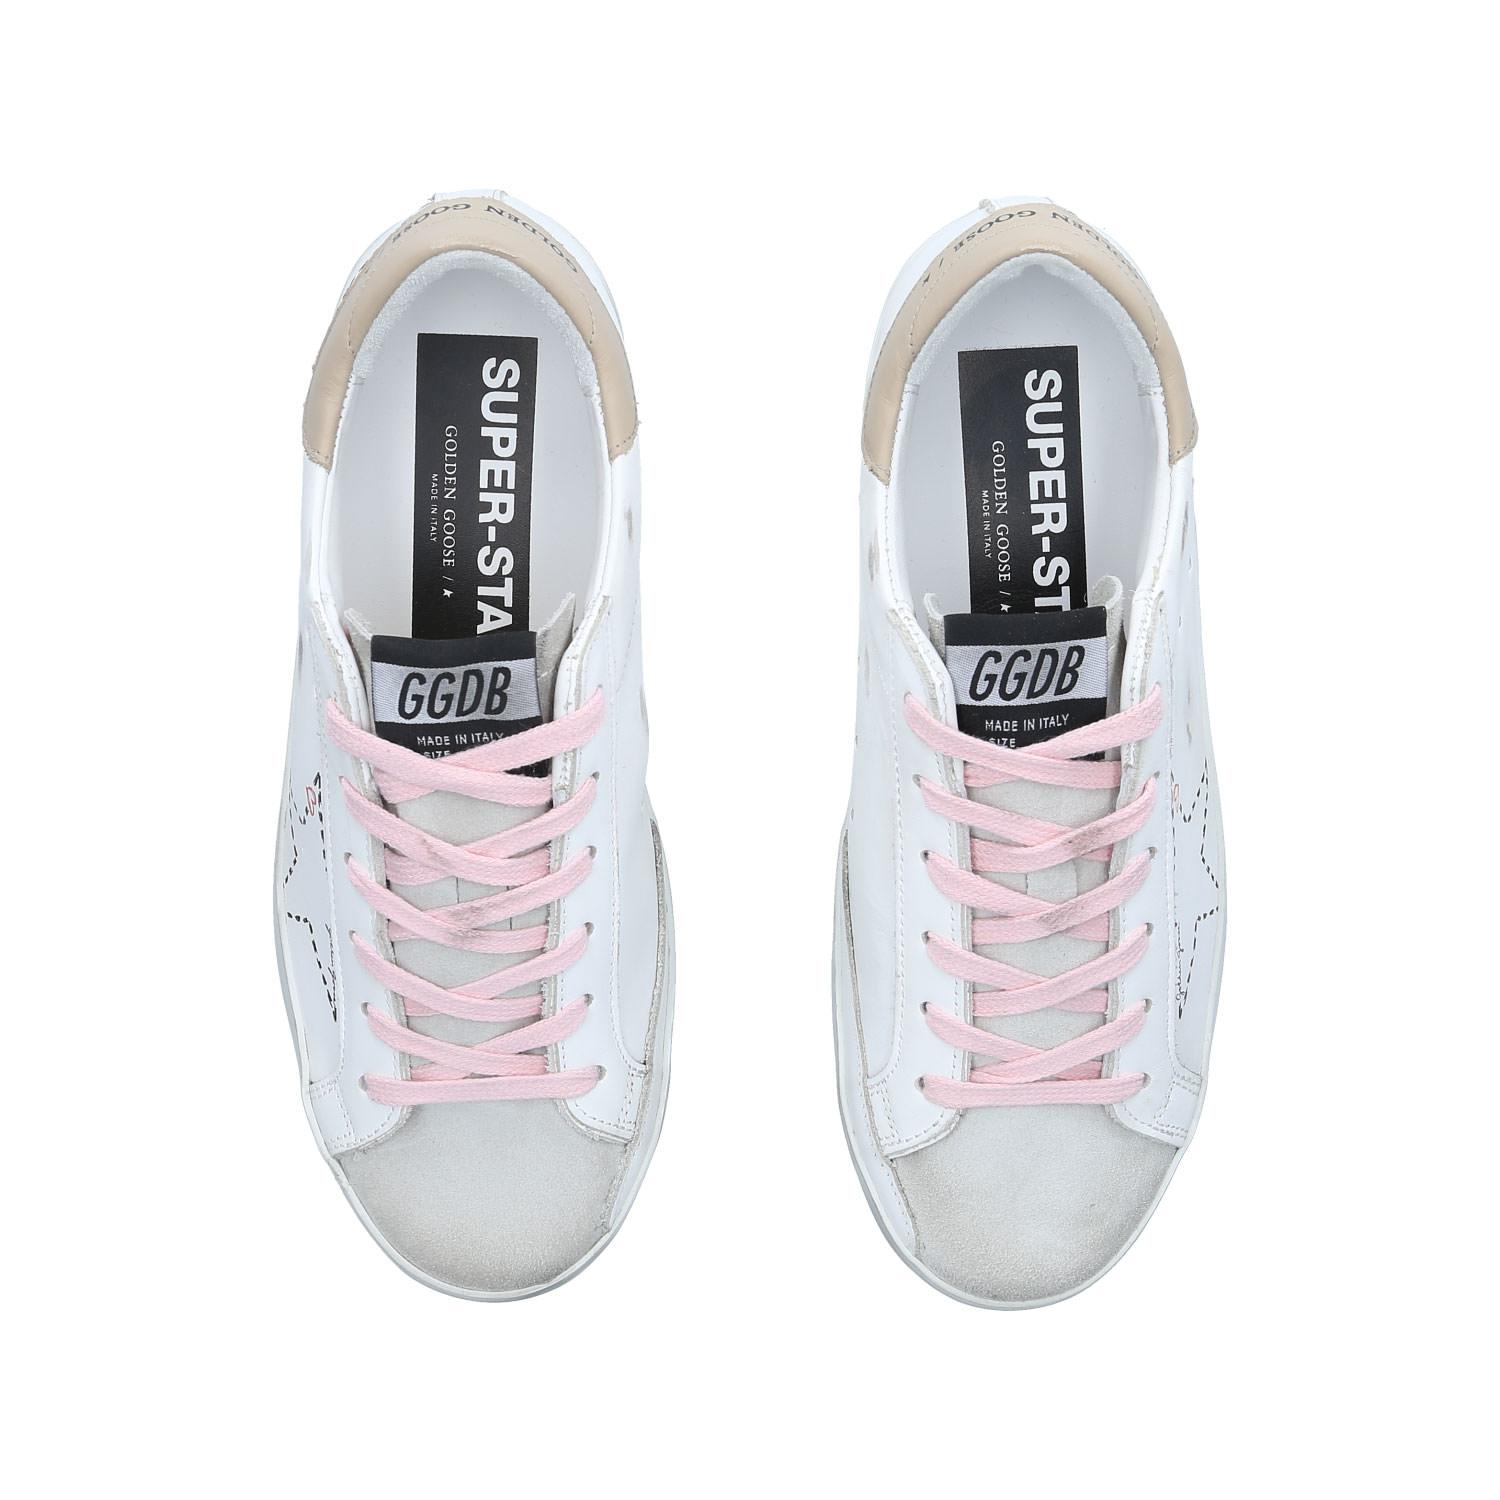 Superstar 80165 Trainers